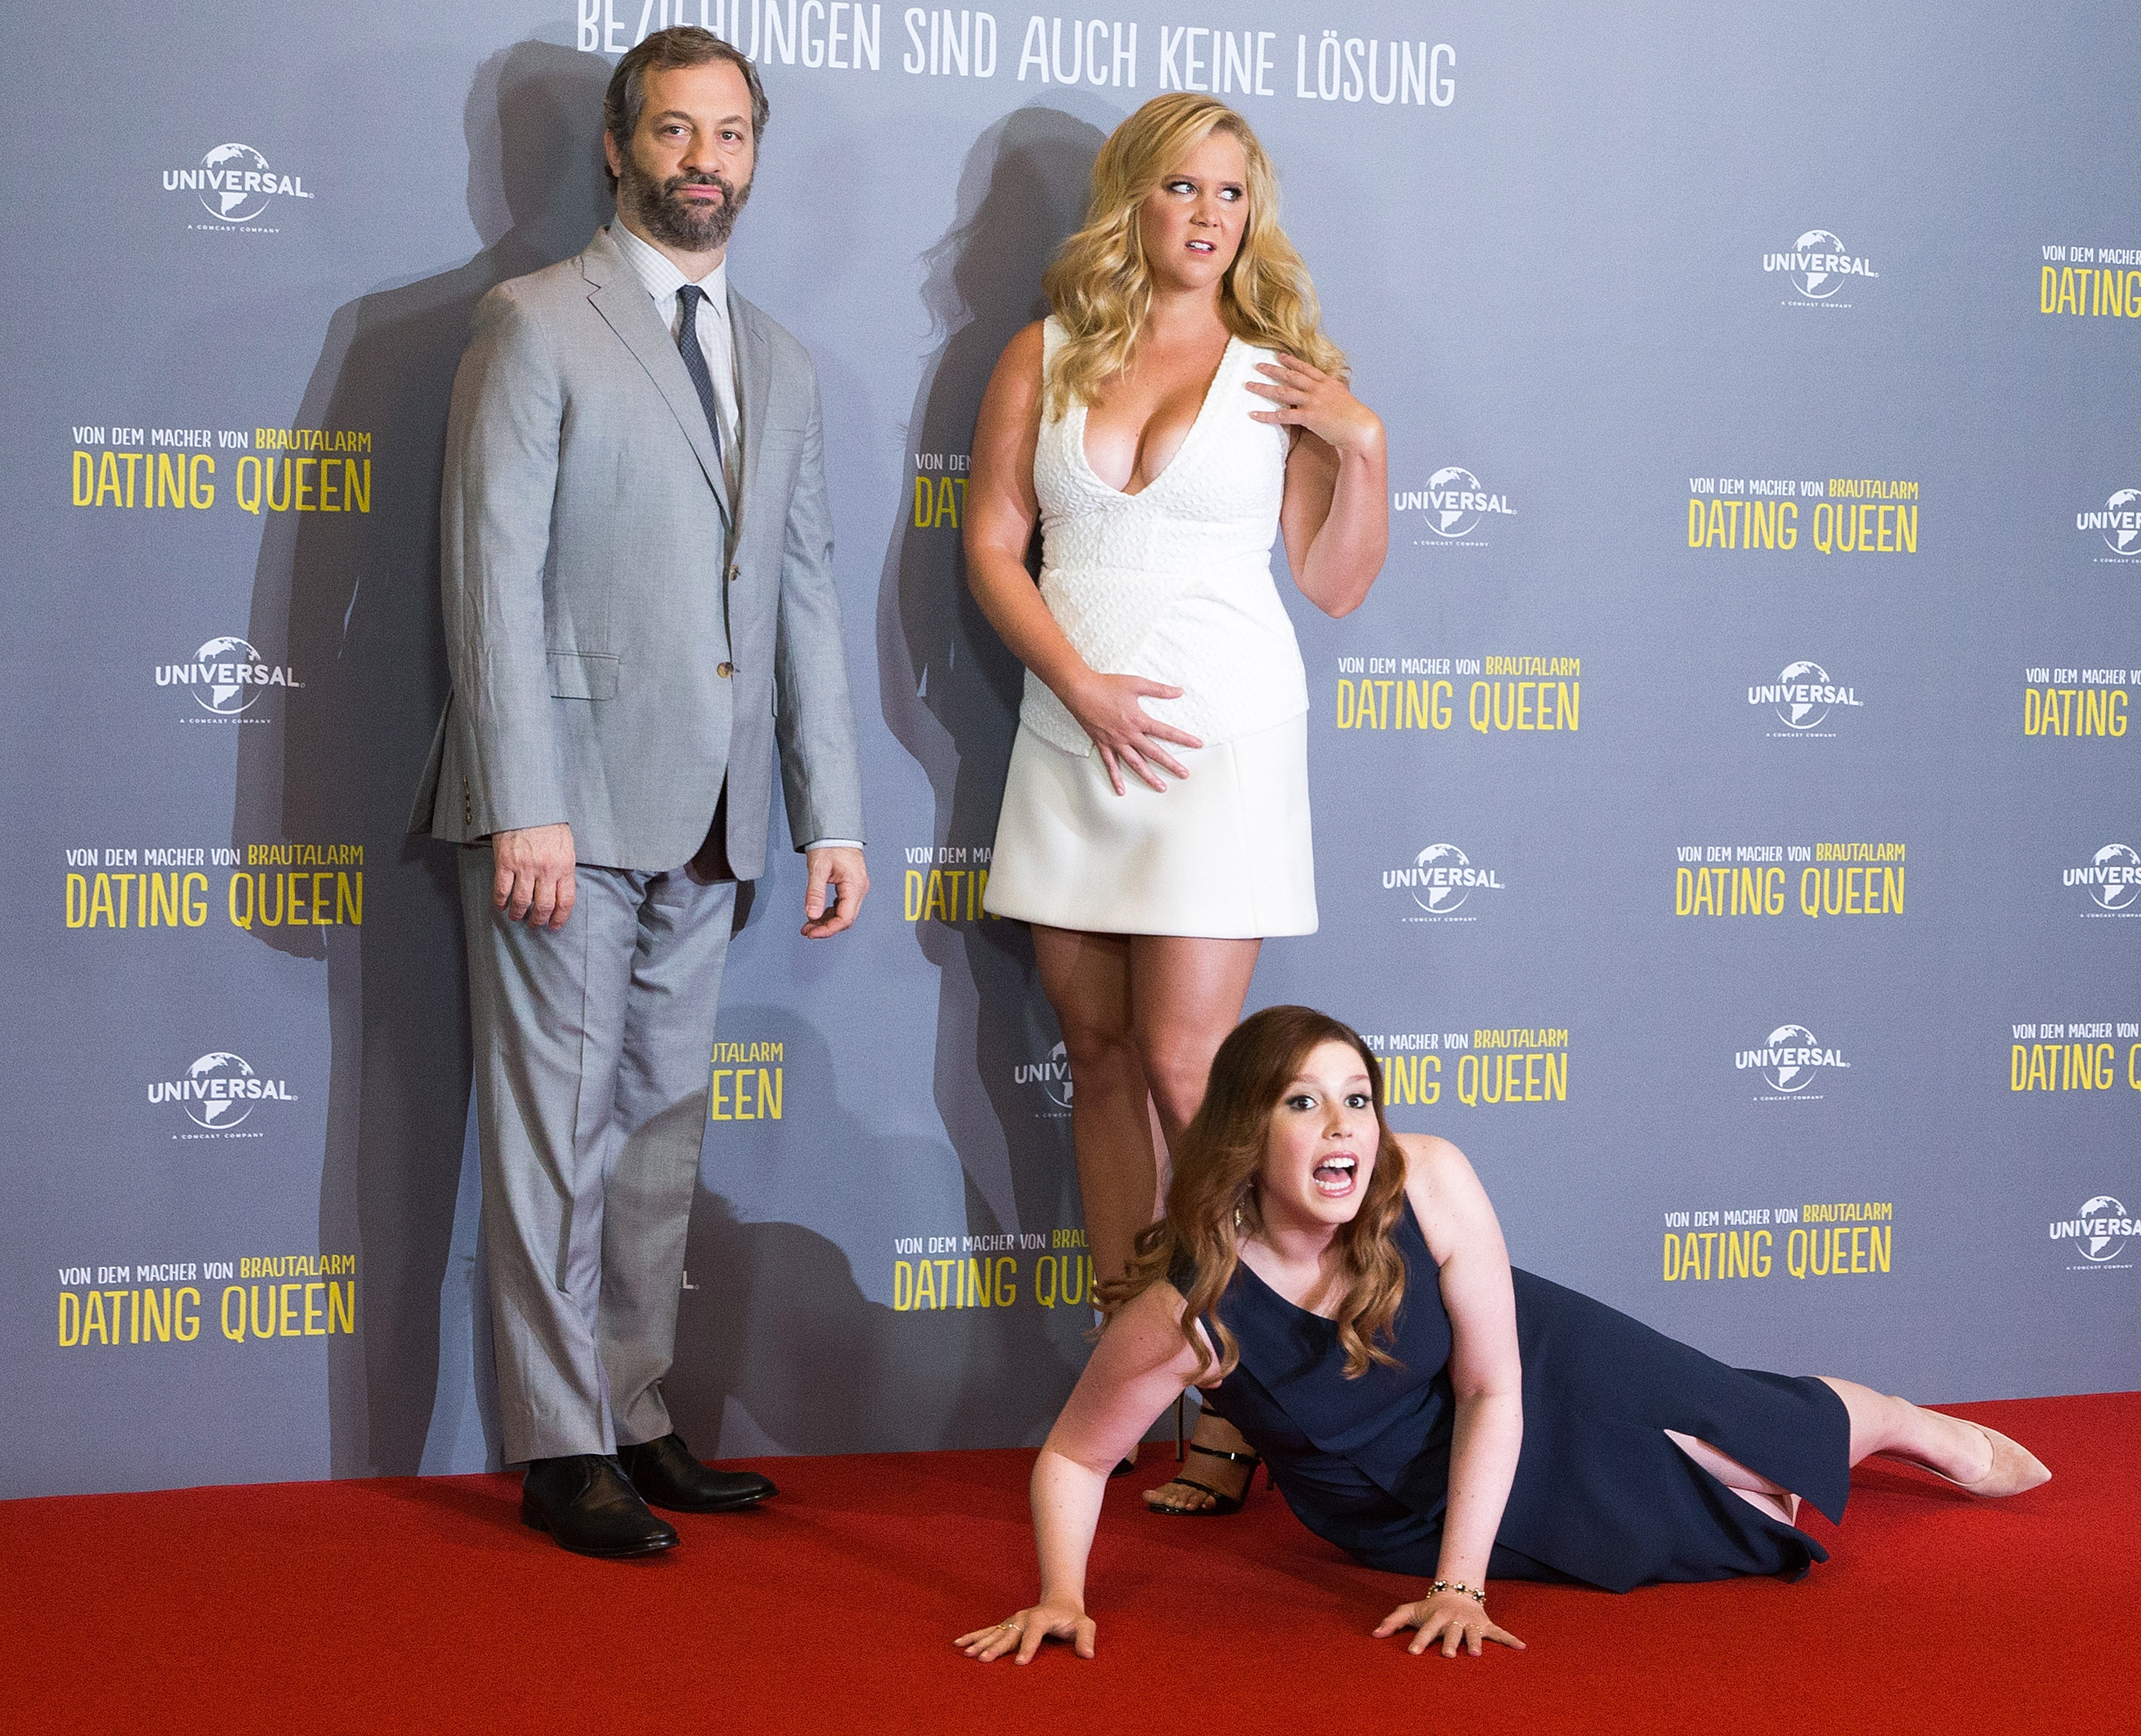 Amy Schumer; Vanessa Bayer and Judd Apatow attend a photo call for the film 'Dating Queen' at Ritz Carlton on August 11, 2015 in Berlin, Germany. (Luca Teuchmann—Getty Images)